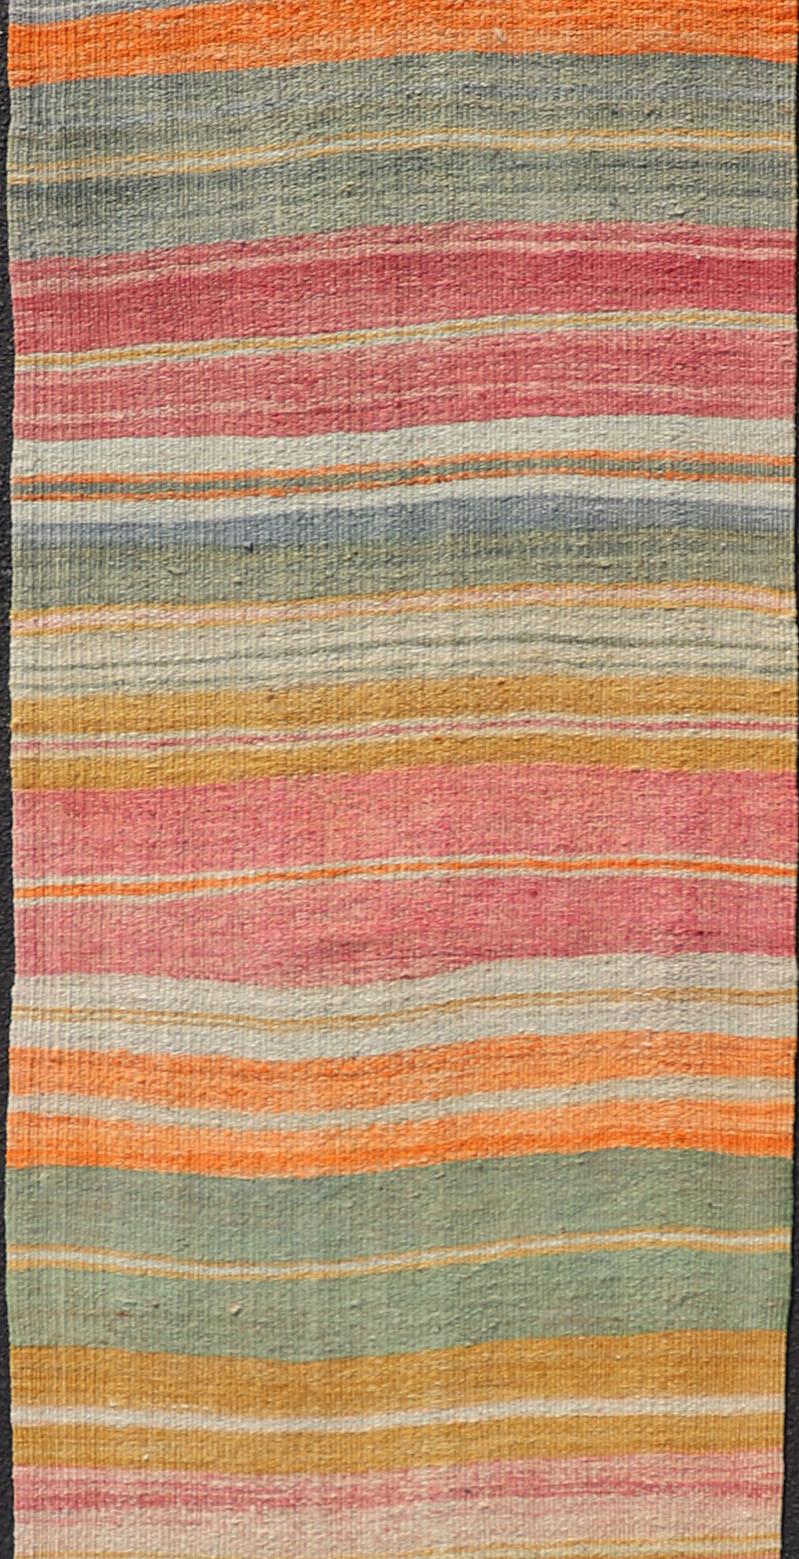 Vintage Turkish Kilim Runner with Horizontal Stripes in Bright Color Tones In Good Condition For Sale In Atlanta, GA